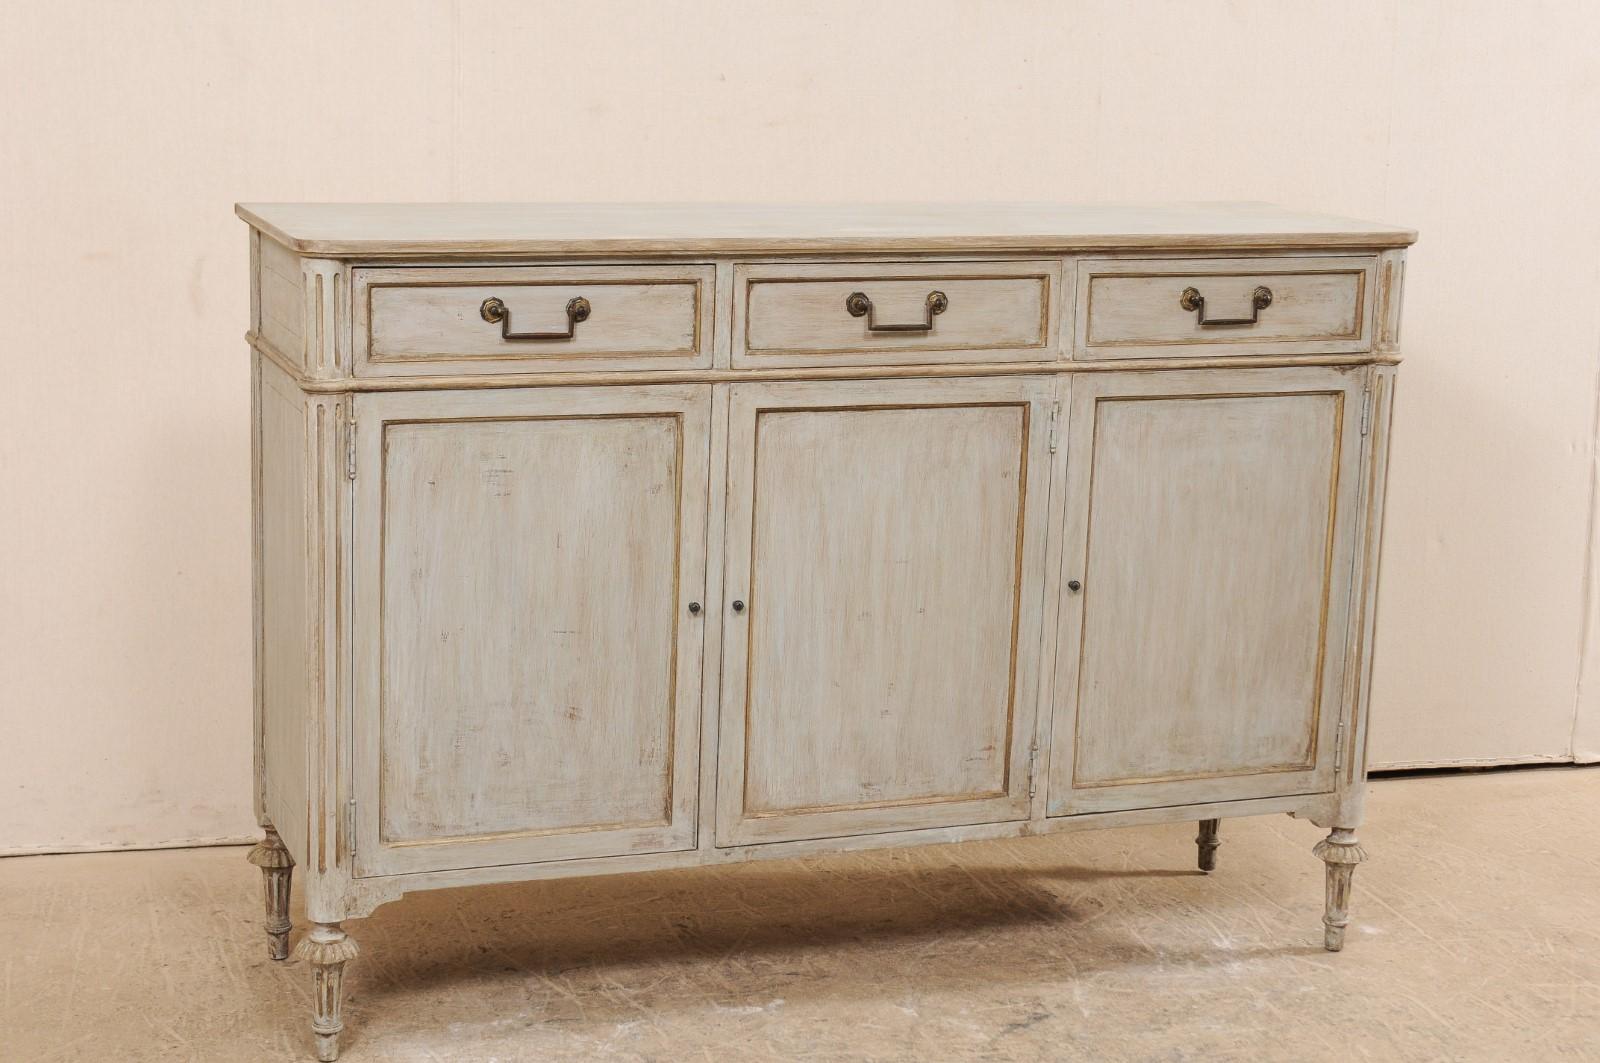 Carved Lovely French Painted Wood Buffet Cabinet from the Mid-20th Century